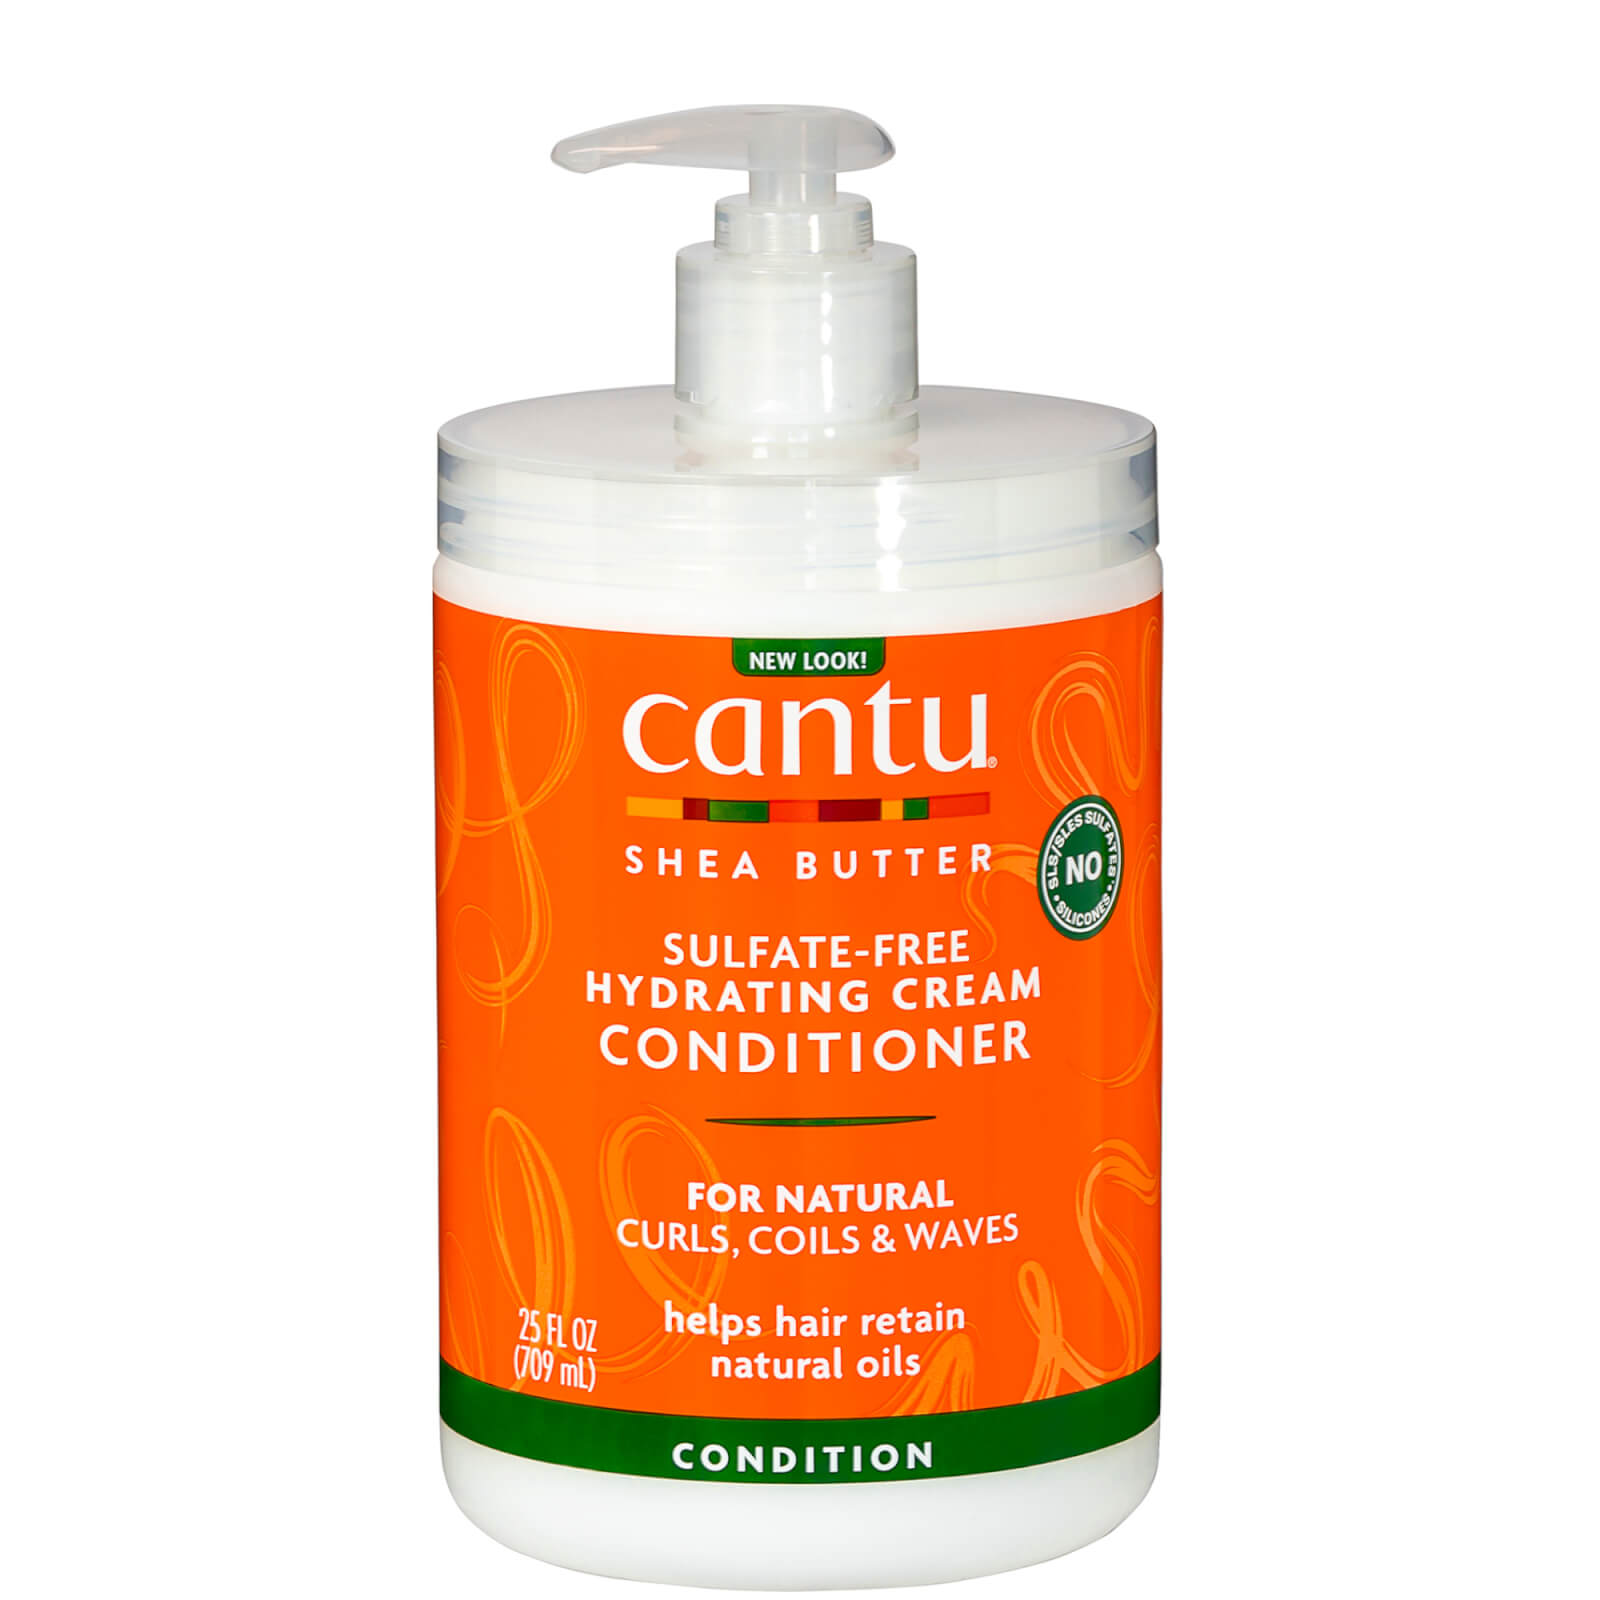 Cantu Shea Butter for Natural Hair Hydrating Cream Conditioner – Salon Size 24 oz